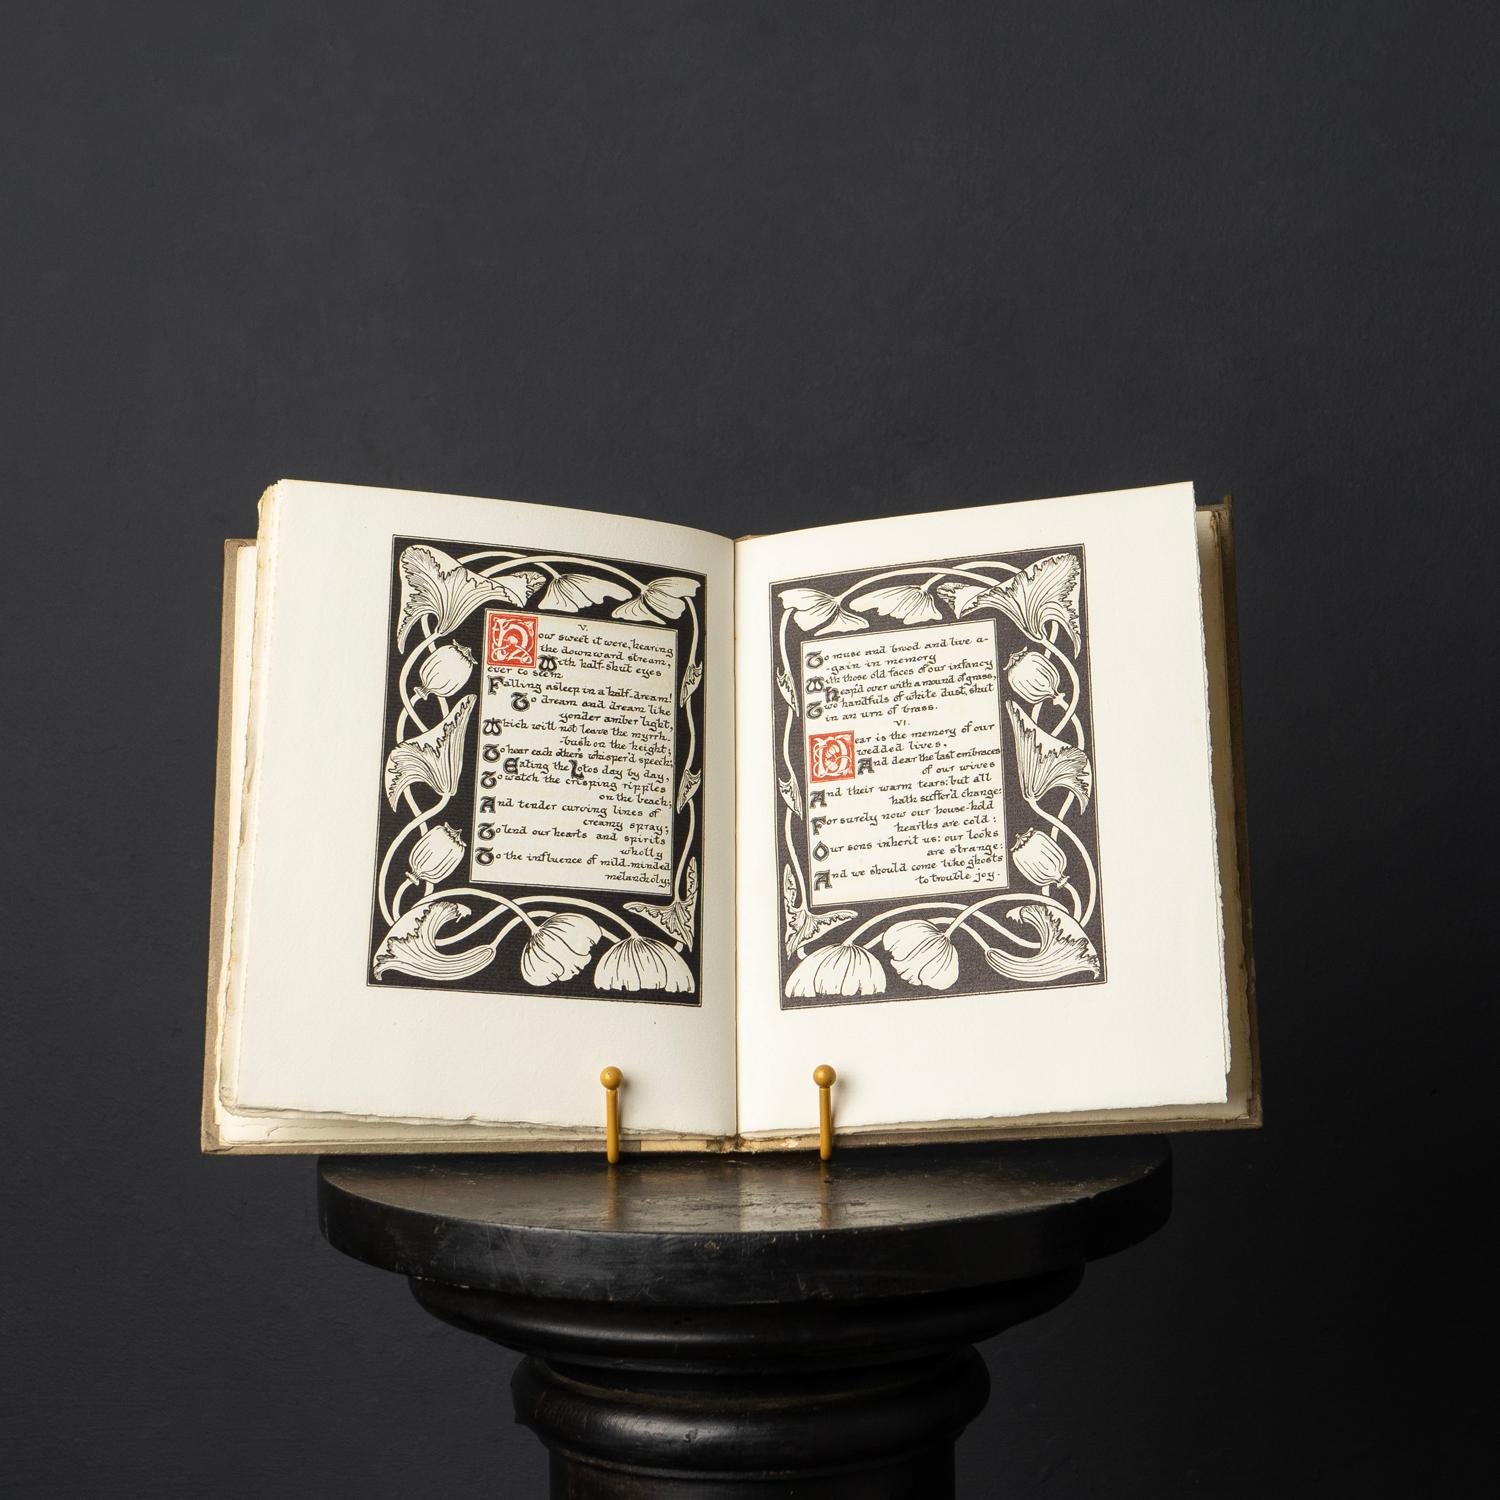 English Art Nouveau Illuminated Copy of 'The Lotos Eaters' by Alfred Lord Tennyson